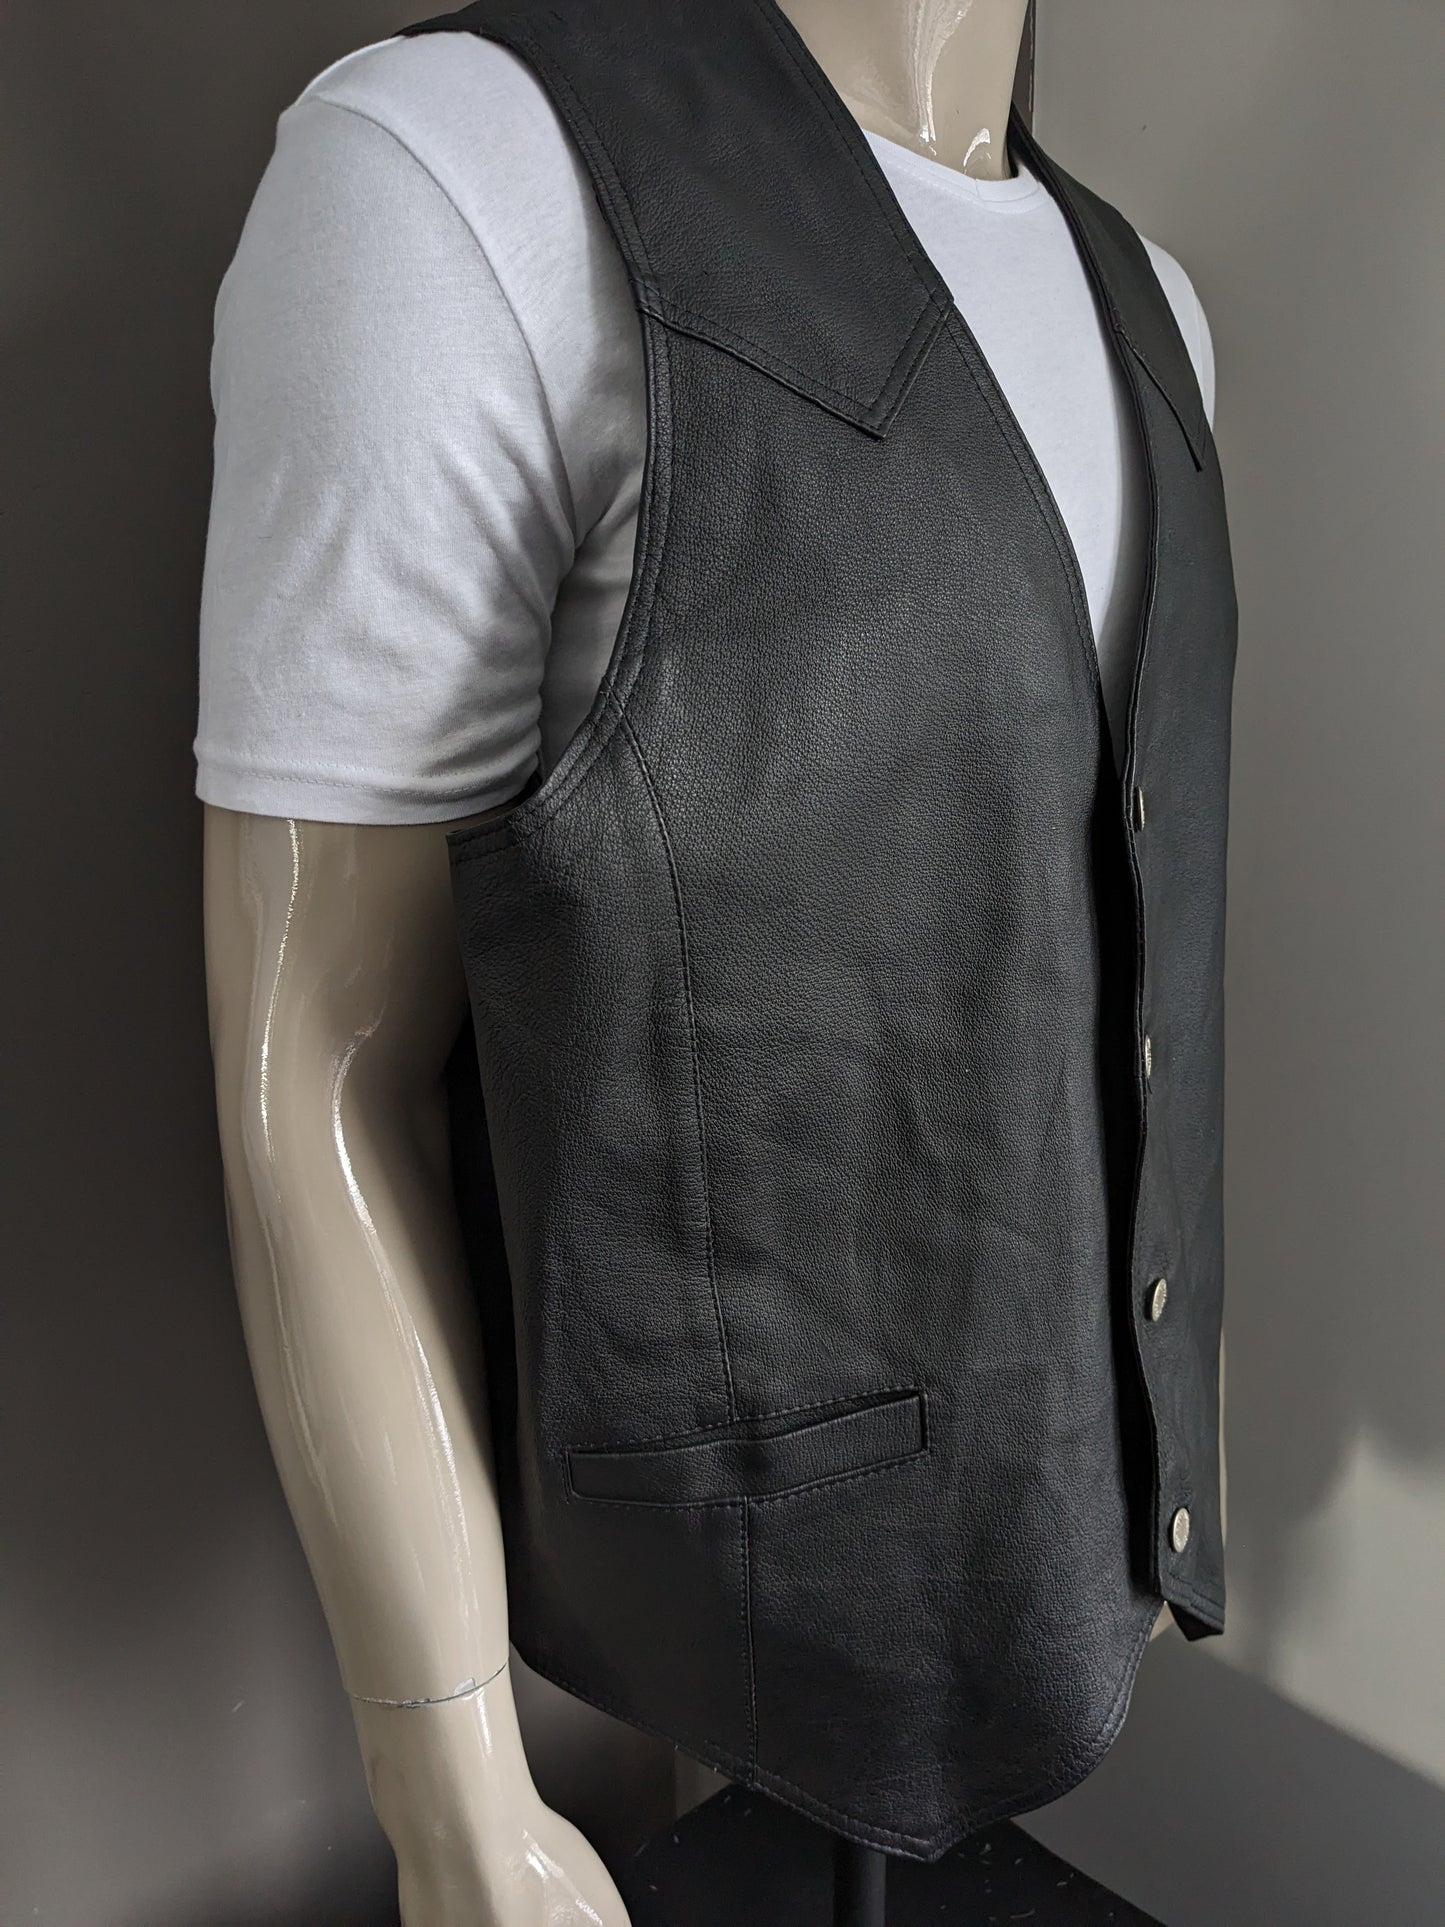 Double -sided John F. Gee Pigs Leather waistcoat with 2 inner pockets. Size XXXL / 3XL